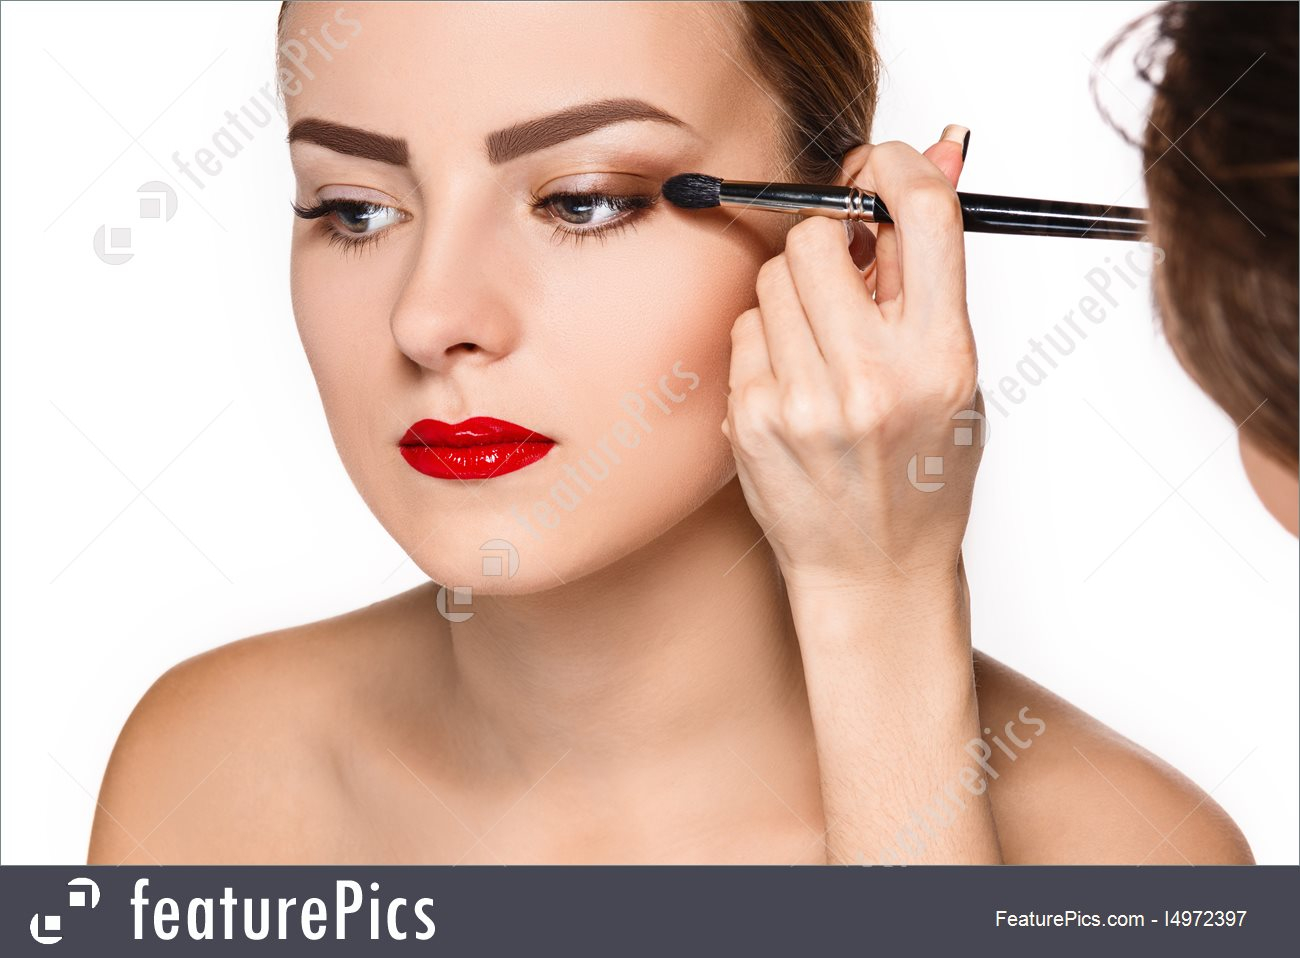 White Makeup Under Eyes Picture Of Female Eyes Makeup